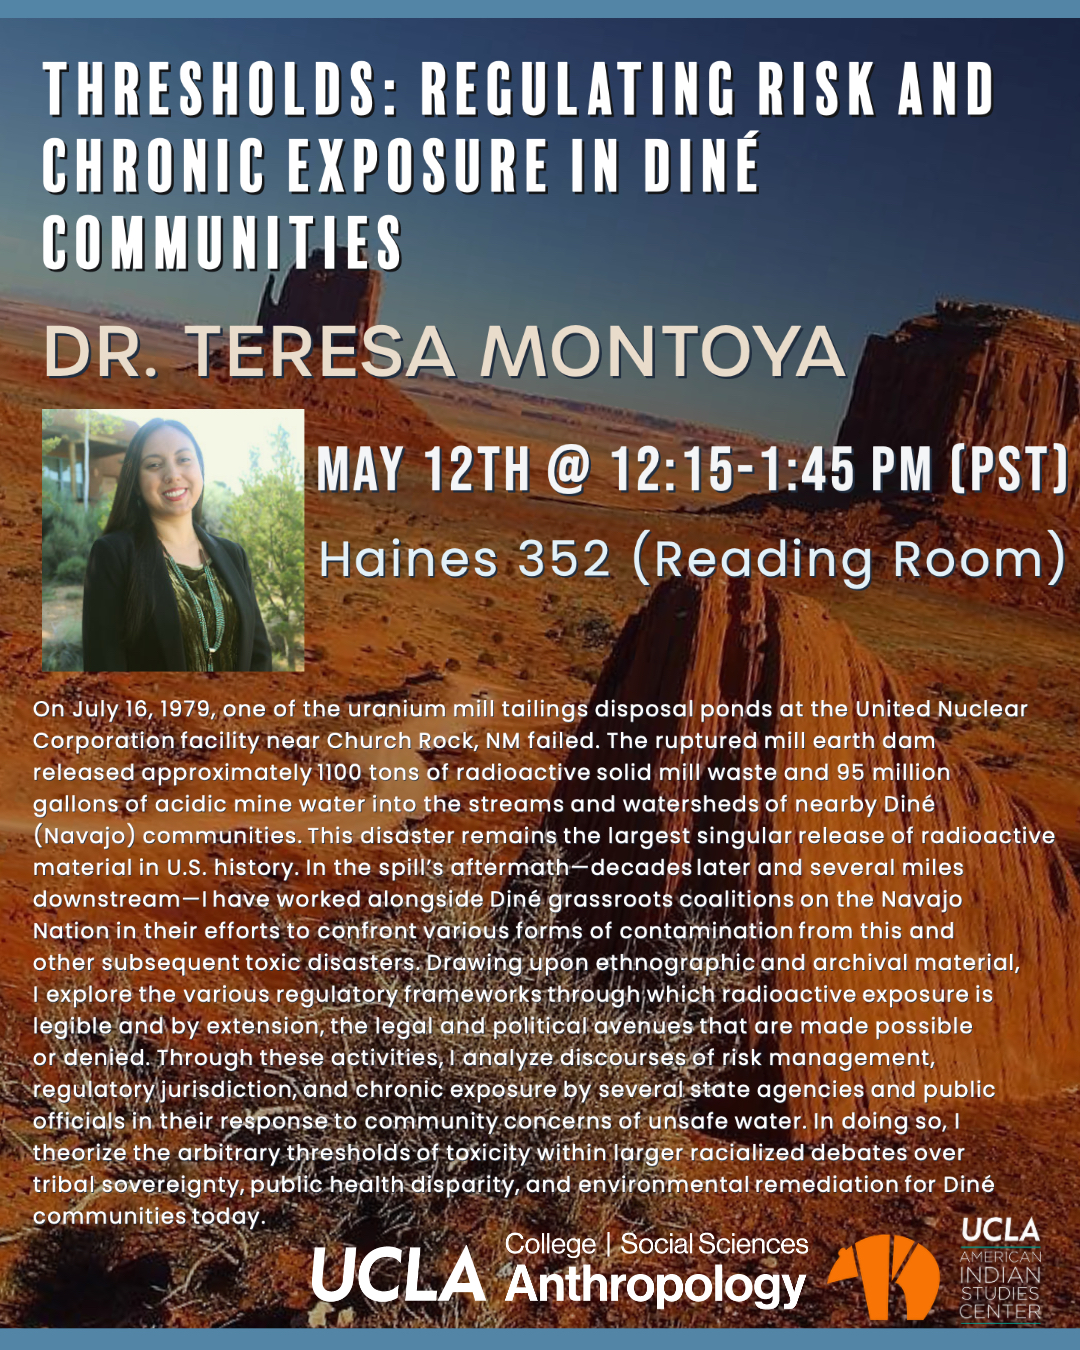 Title: Thresholds: Regulating Rise and Chronic Exposure in Diné Communities.